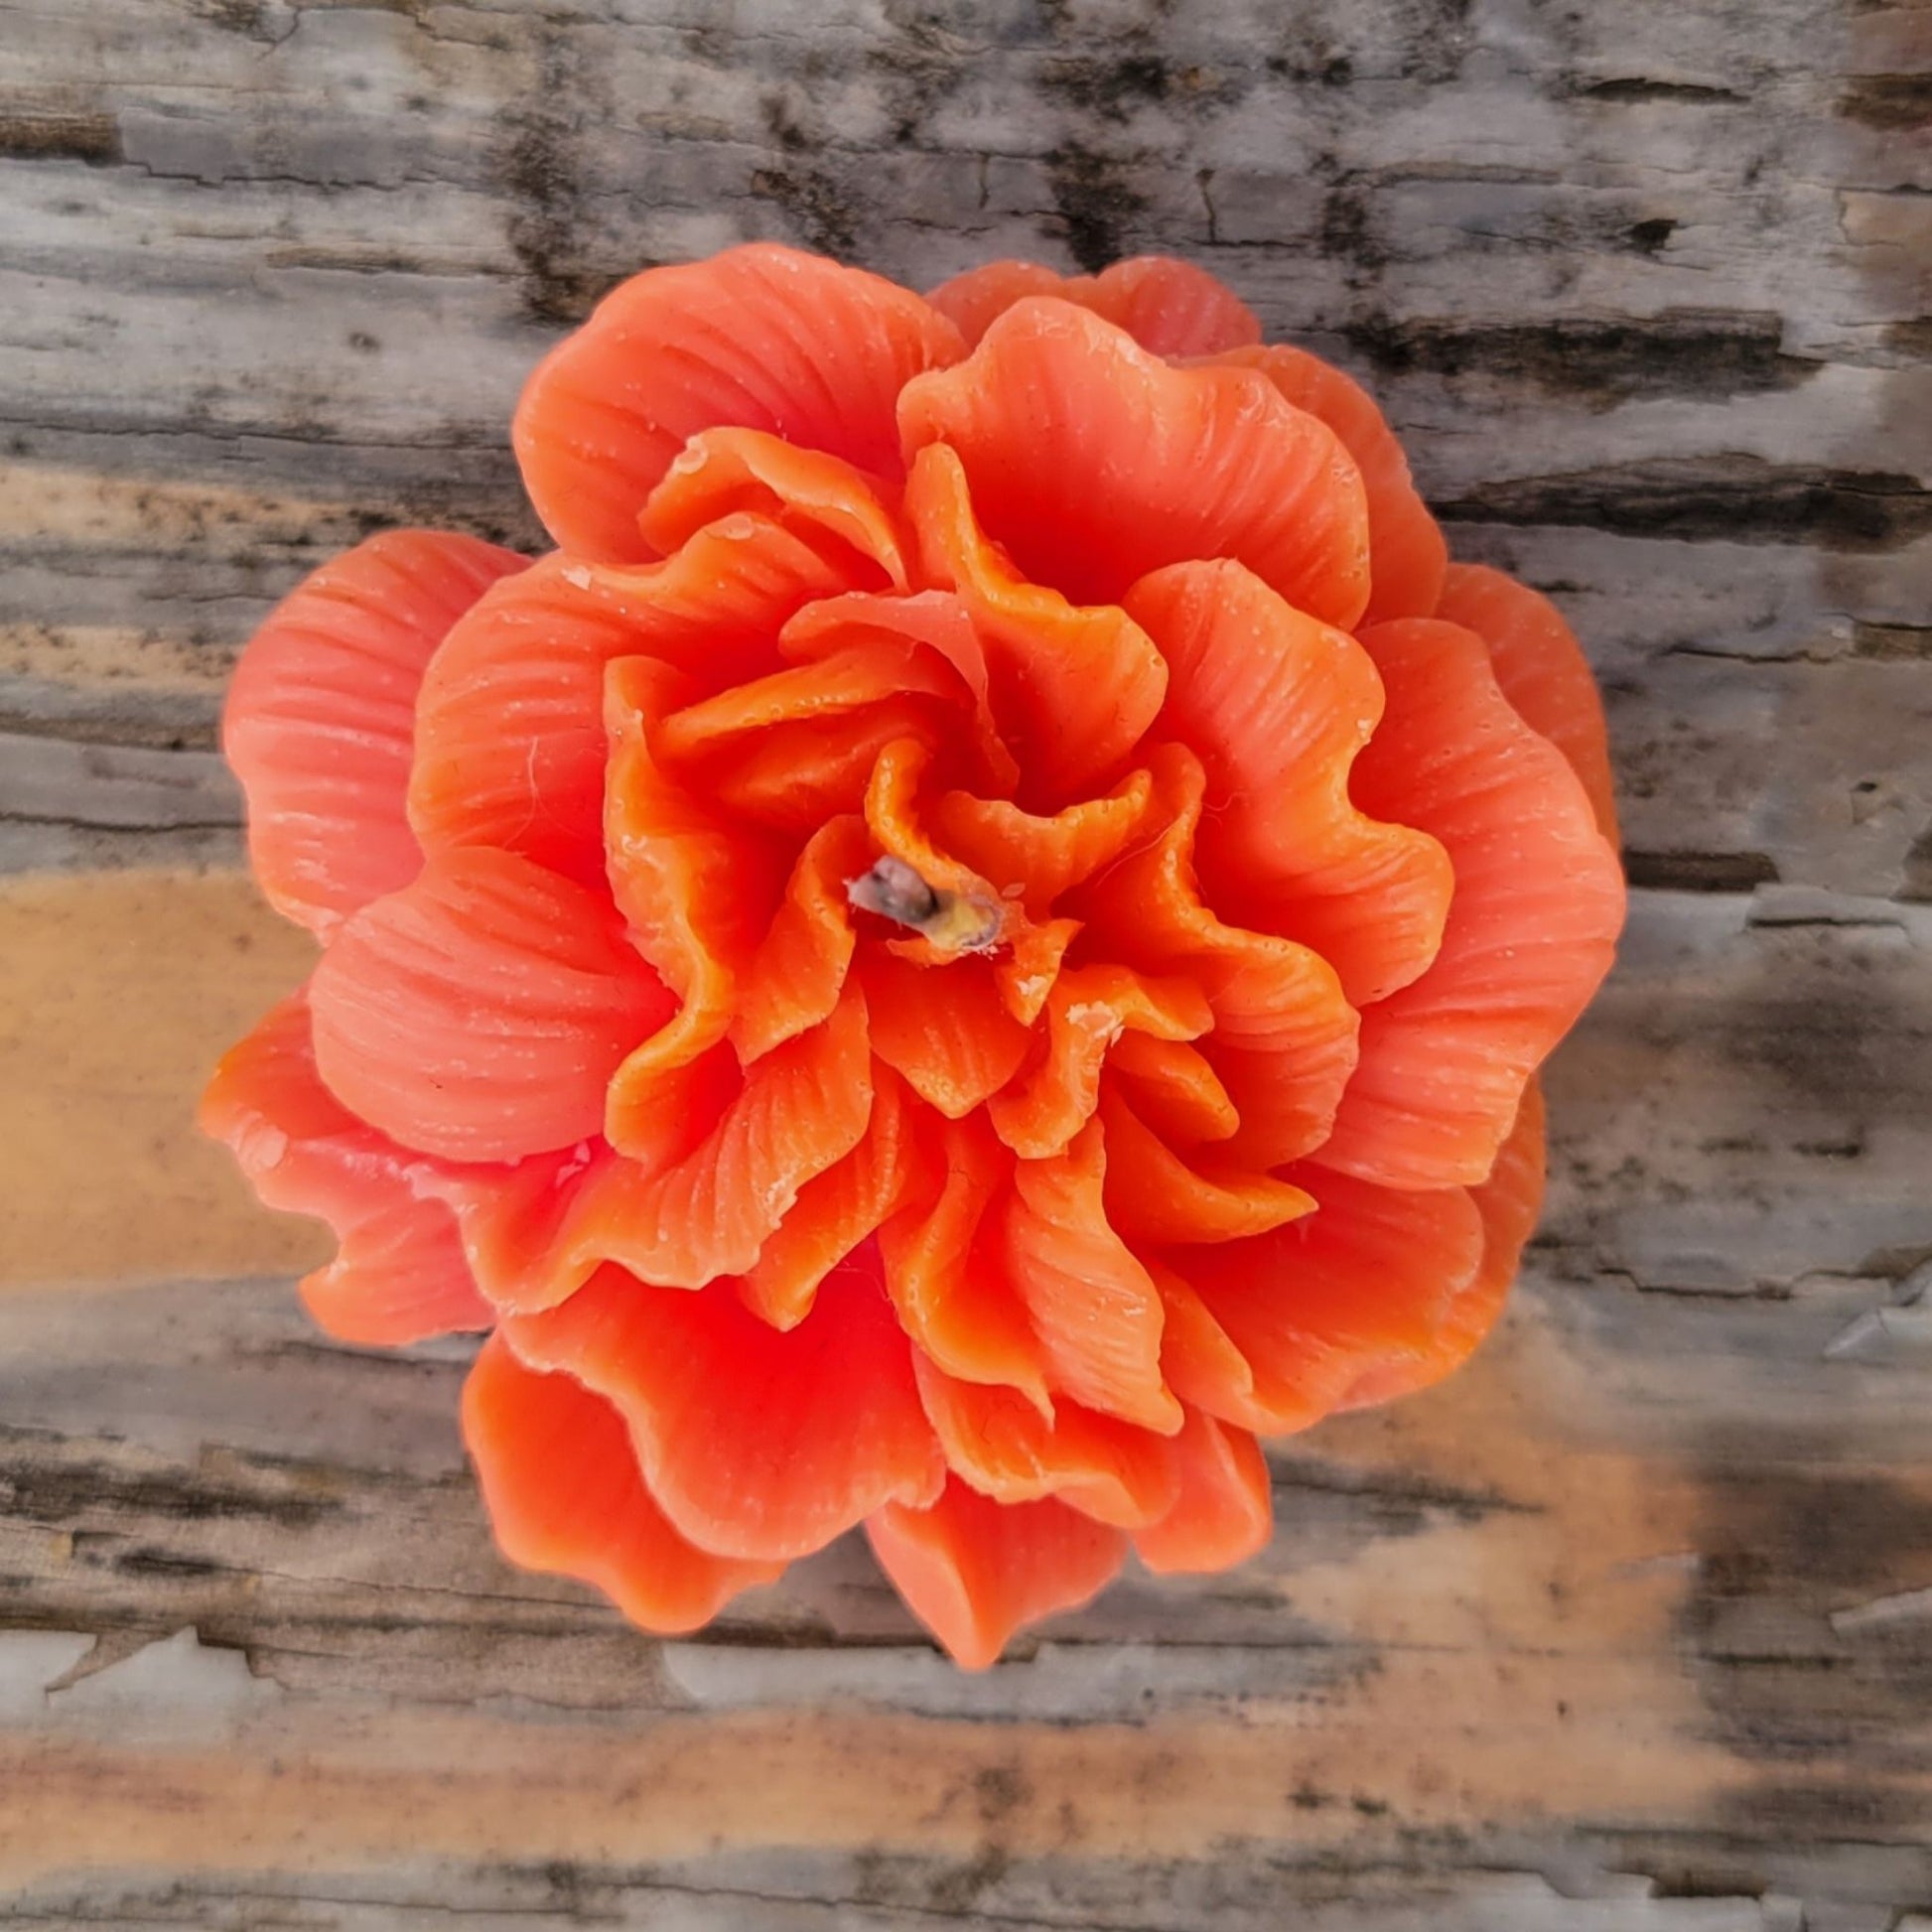 A handmade coral flower votive candle.